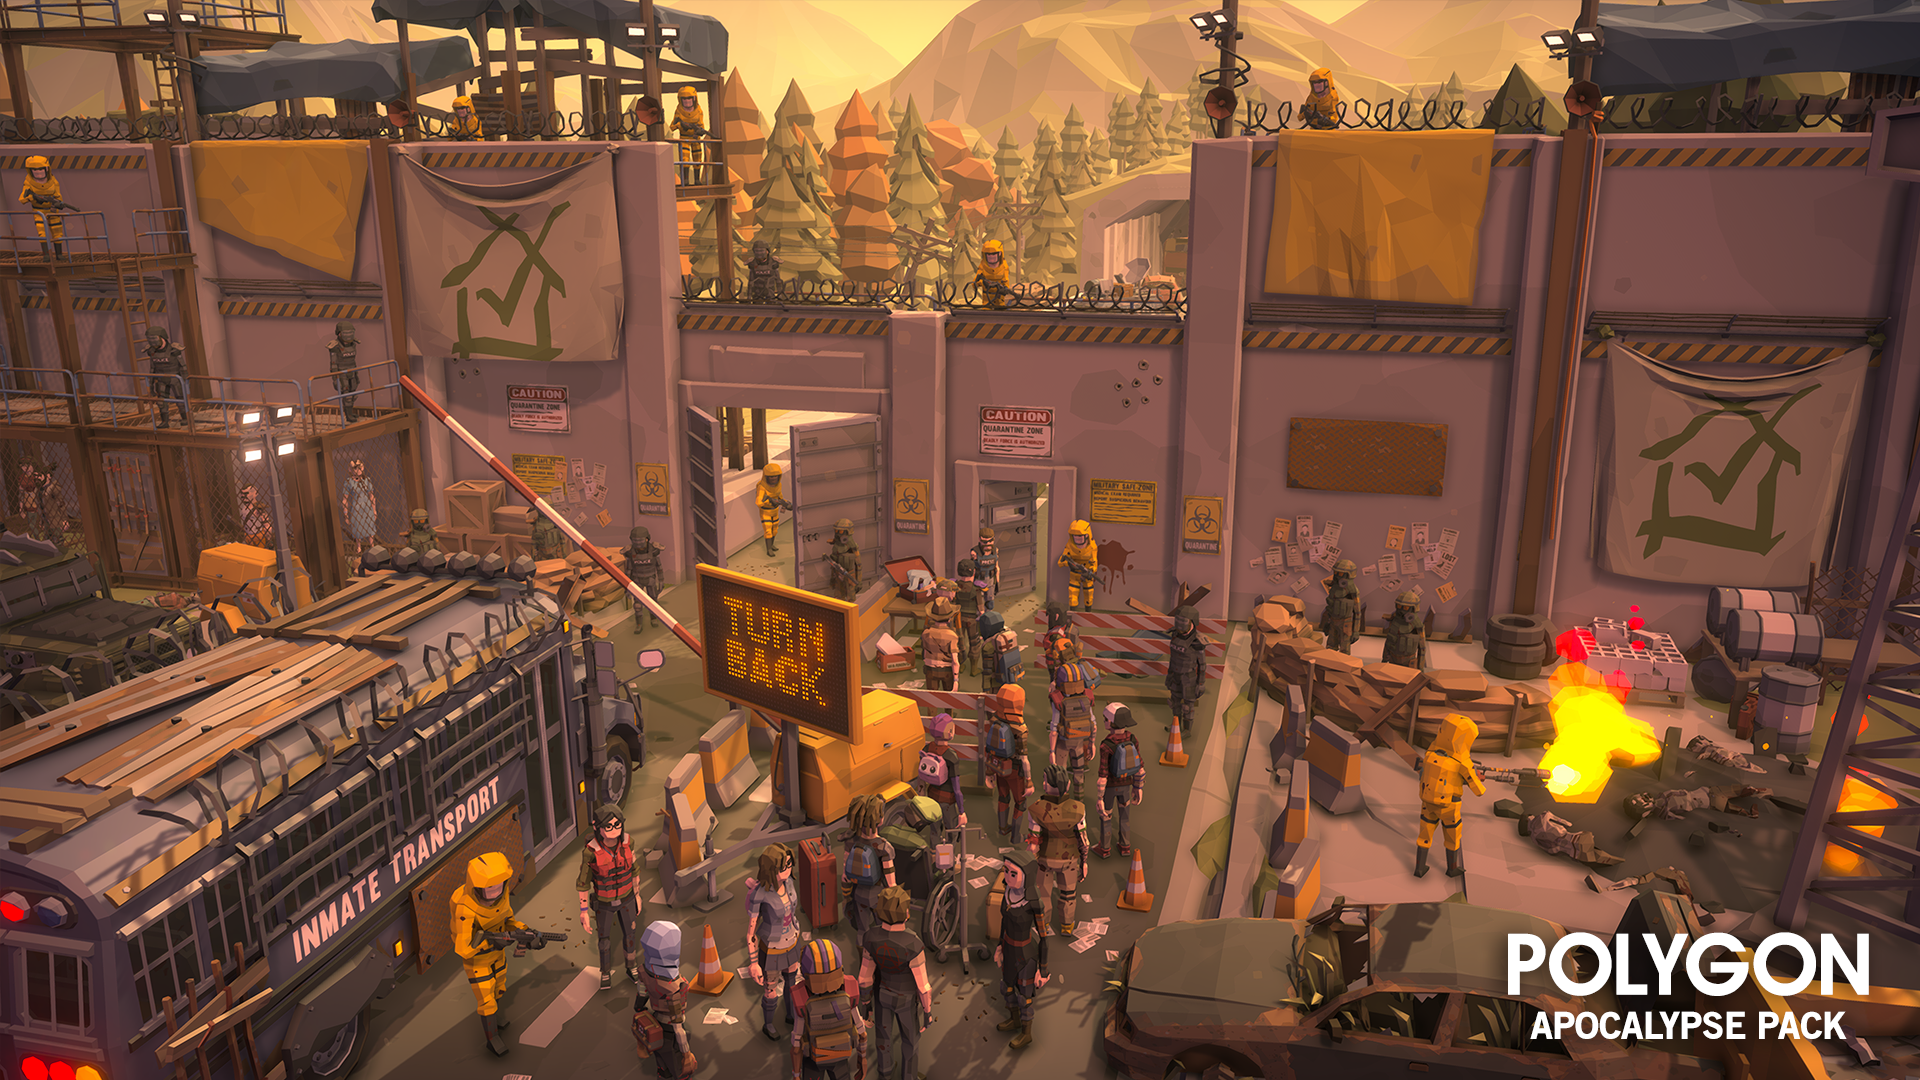 Apocalypse game scene with low poly characters manning a city wall with guards on crowd control